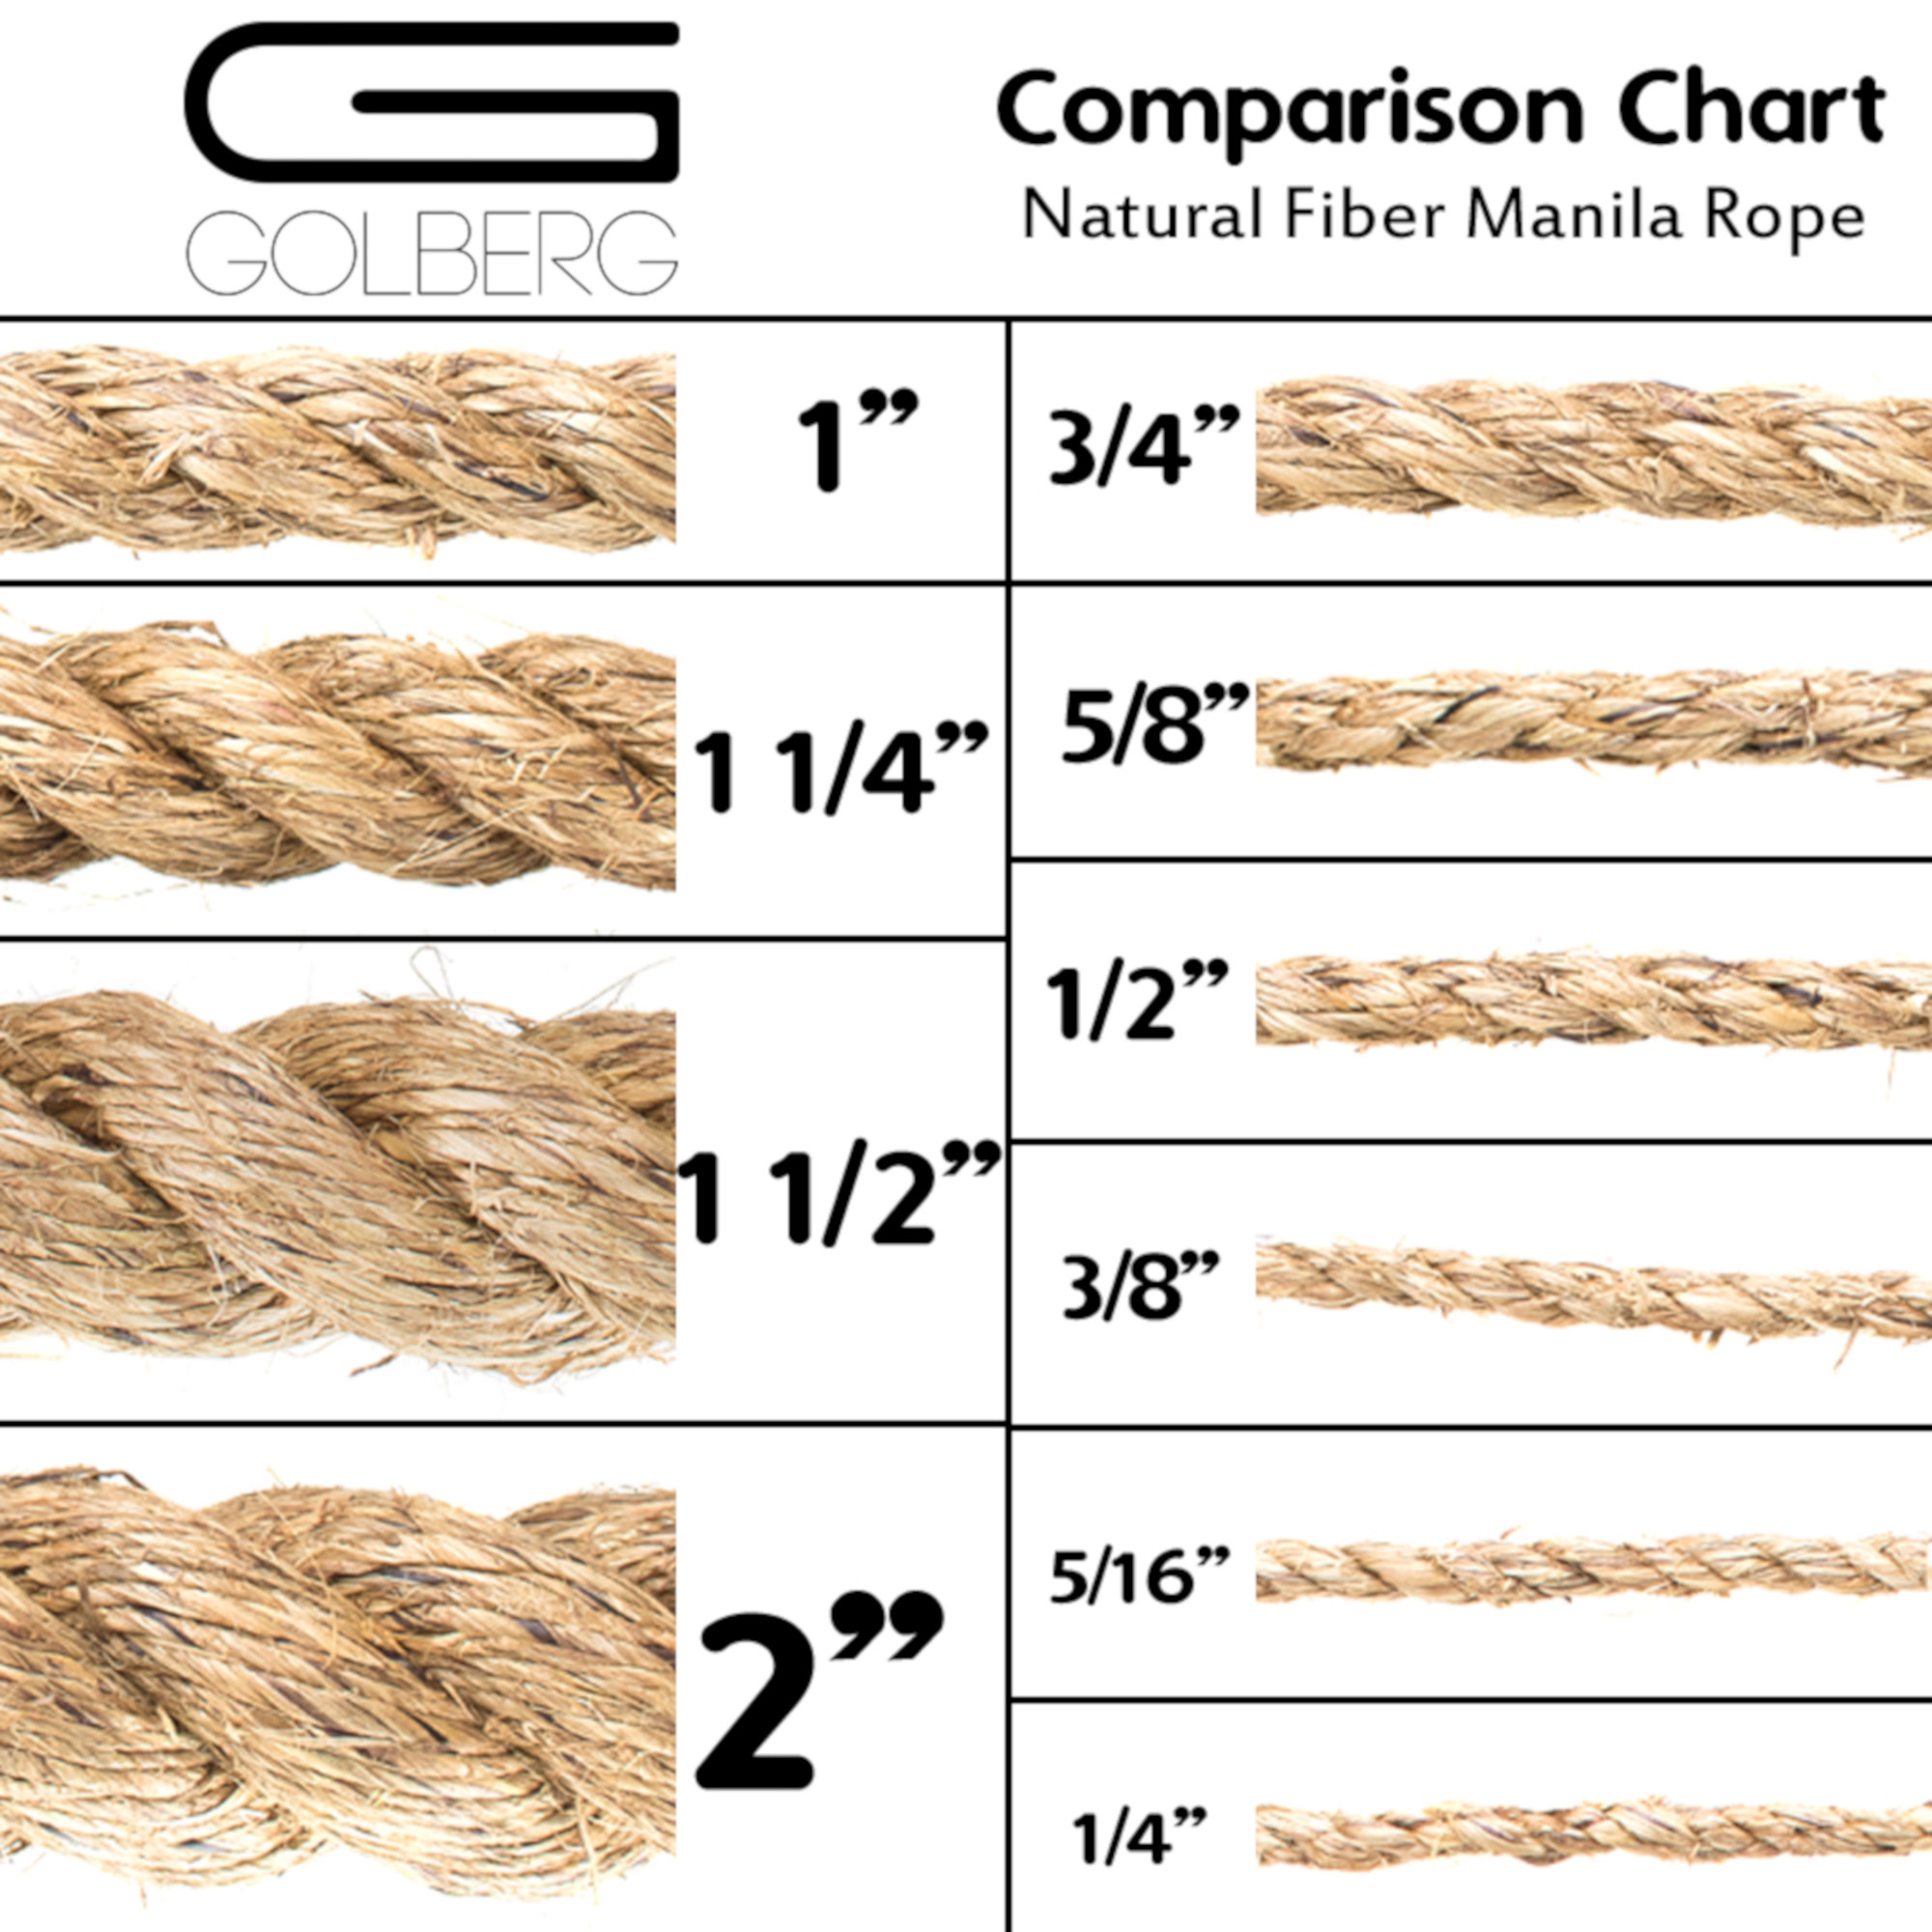 GOLBERG Manila Rope - Heavy Duty 3 Strand Natural Fiber - 1/4 inch, 5/16 inch, 3/8 inch, 1/2 inch, 5/8 inch, 3/4 inch, 1 inch, 2 inch - Available in Different Lengths - image 2 of 5